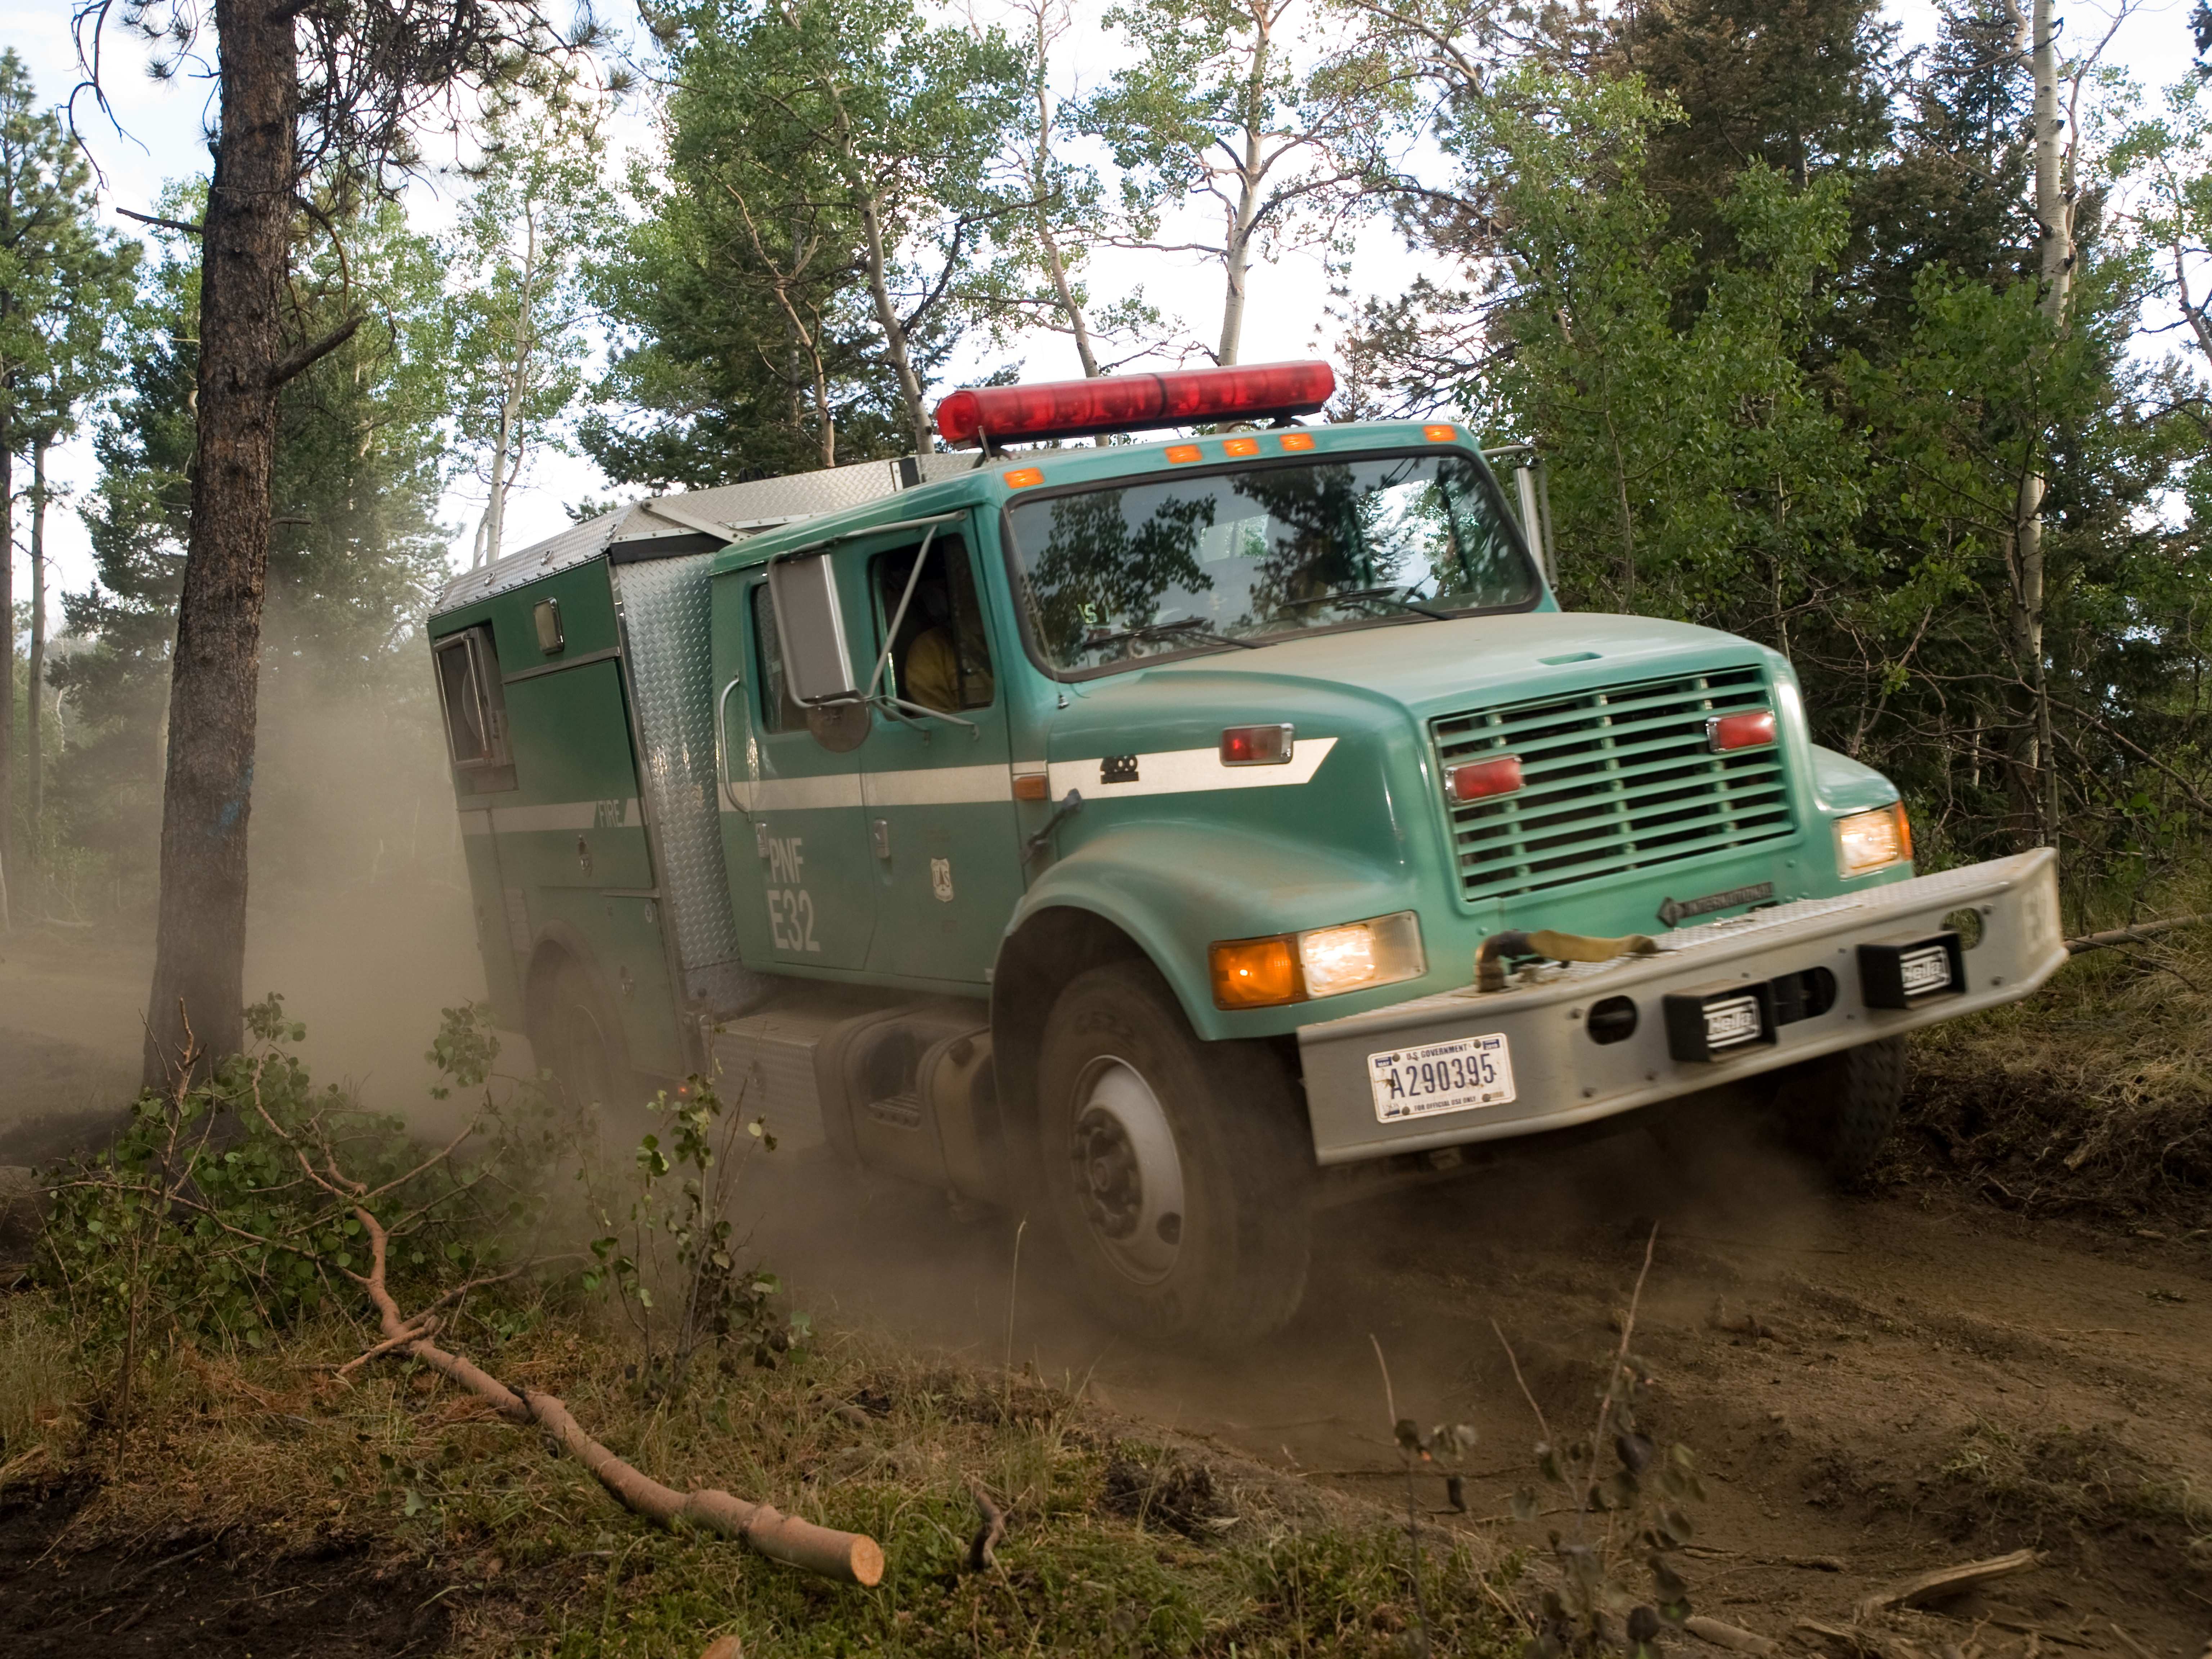 A green USDA Forest Service wildland fire truck moving down a dusty dirt road in a forest.